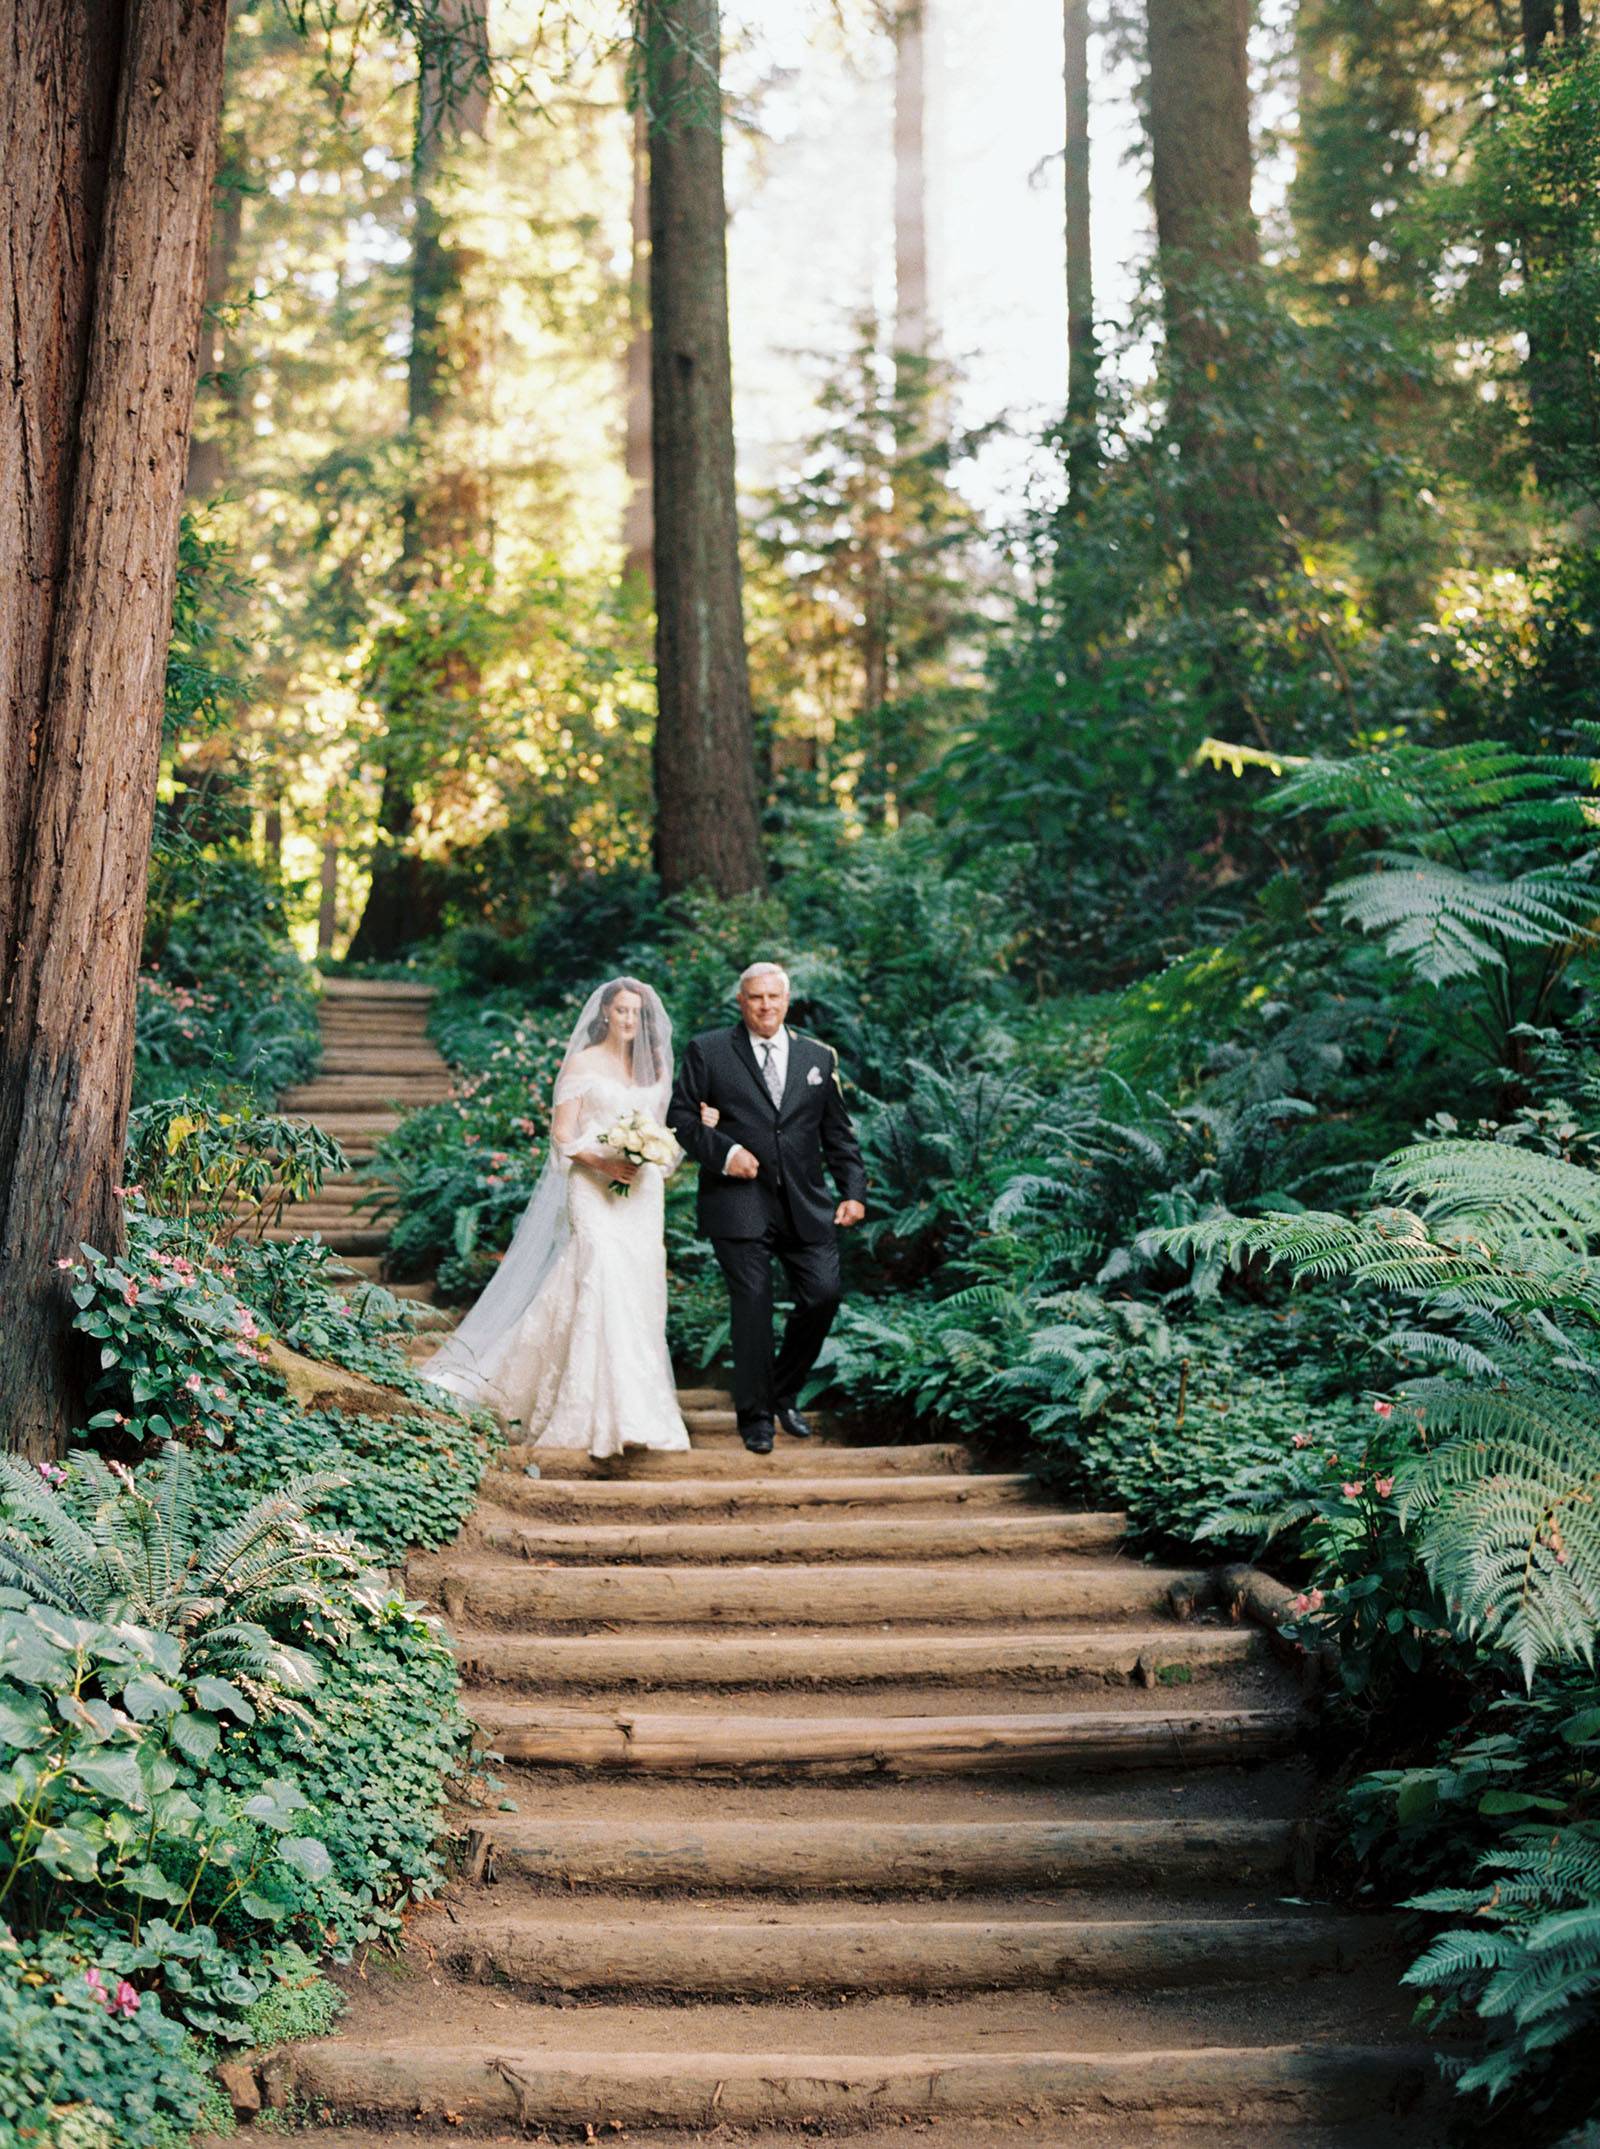 Timeless And Elegant Wedding In The Lush California Redwood Forests